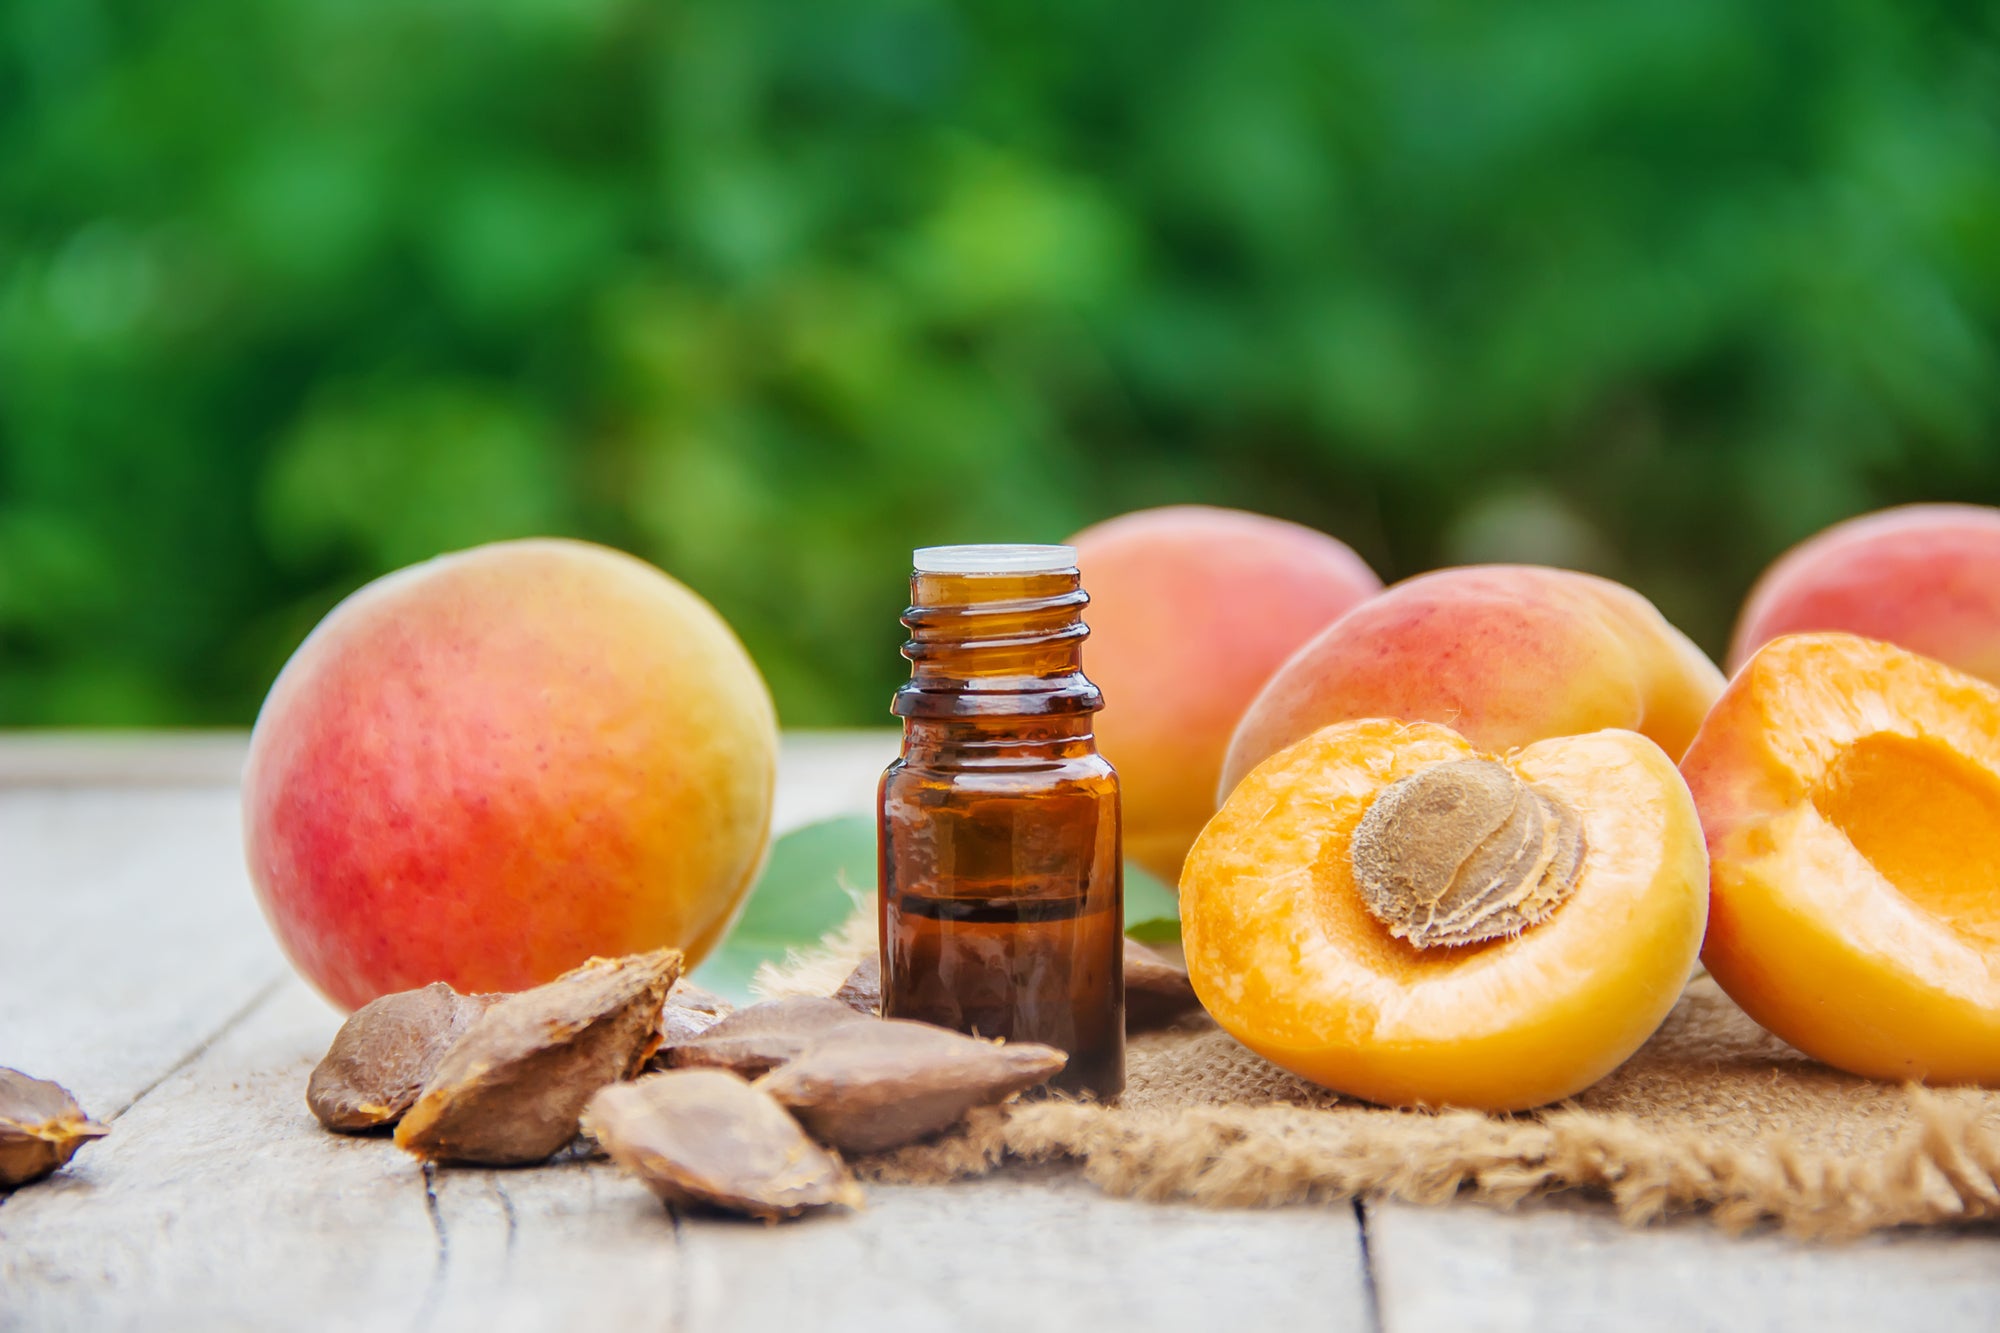 Apricot kernel oil, or what summer has best to offer!